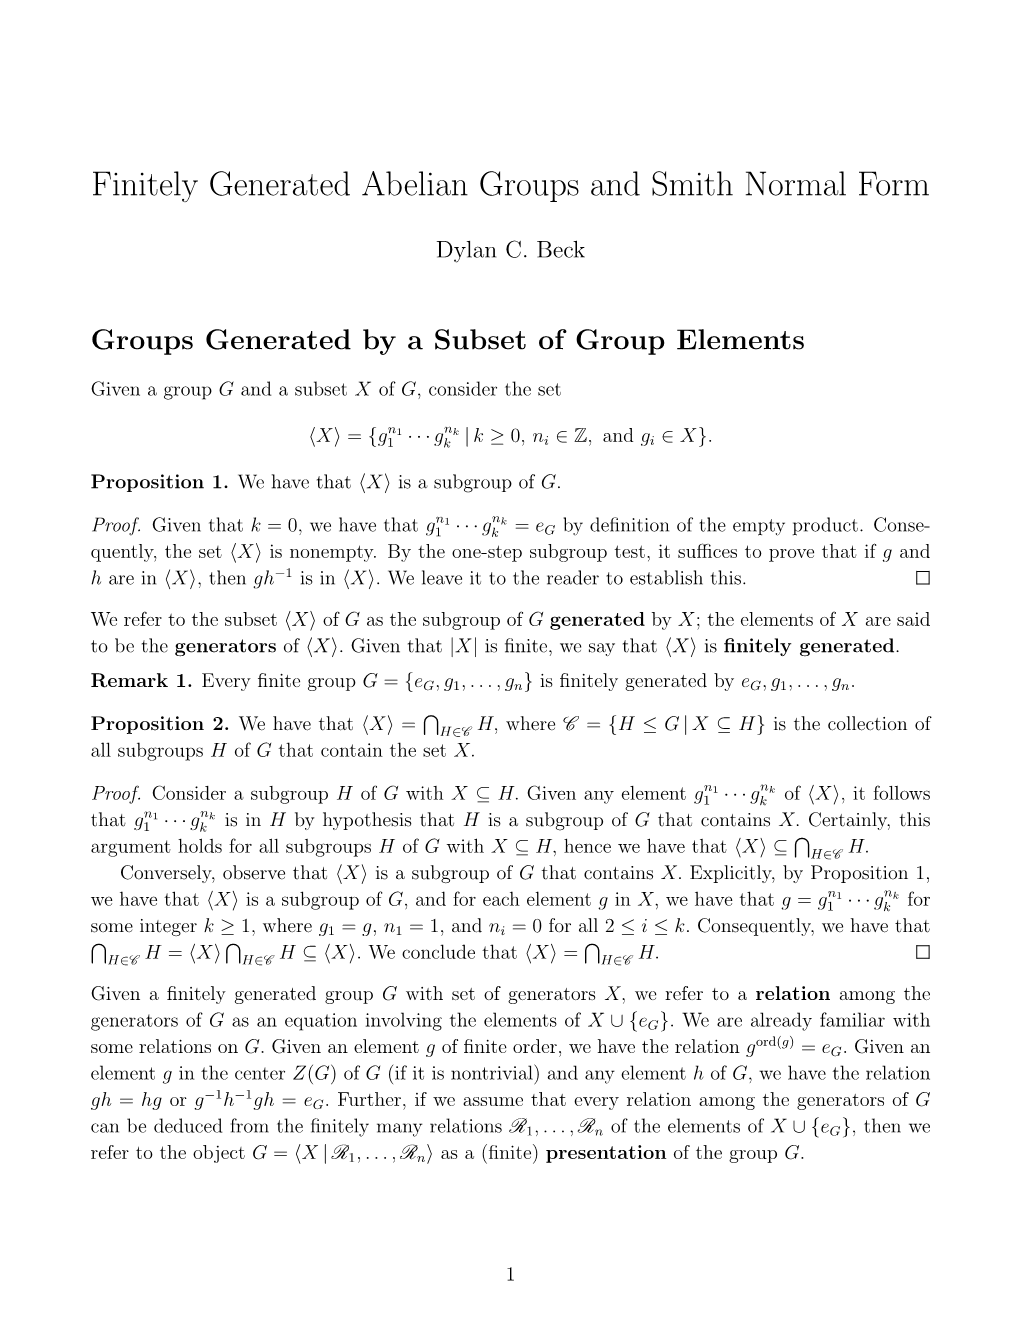 Finitely Generated Abelian Groups and Smith Normal Form